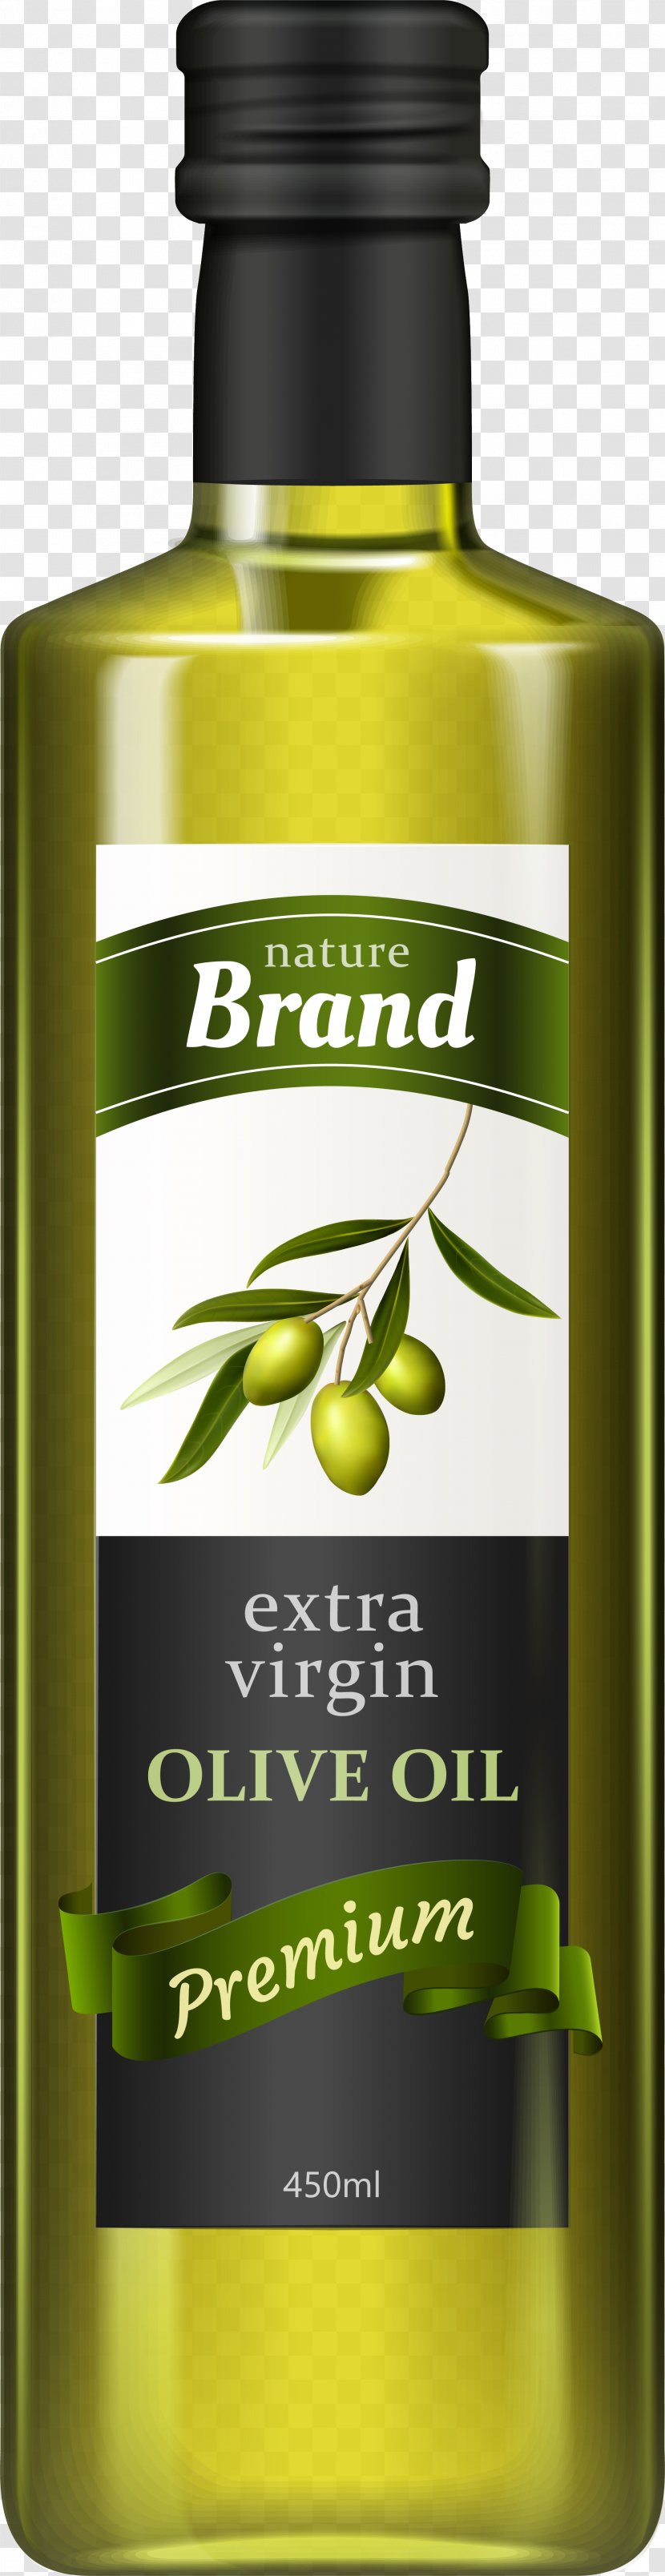 Olive Oil Bottle - Packaging And Labeling - A Of Vector Transparent PNG